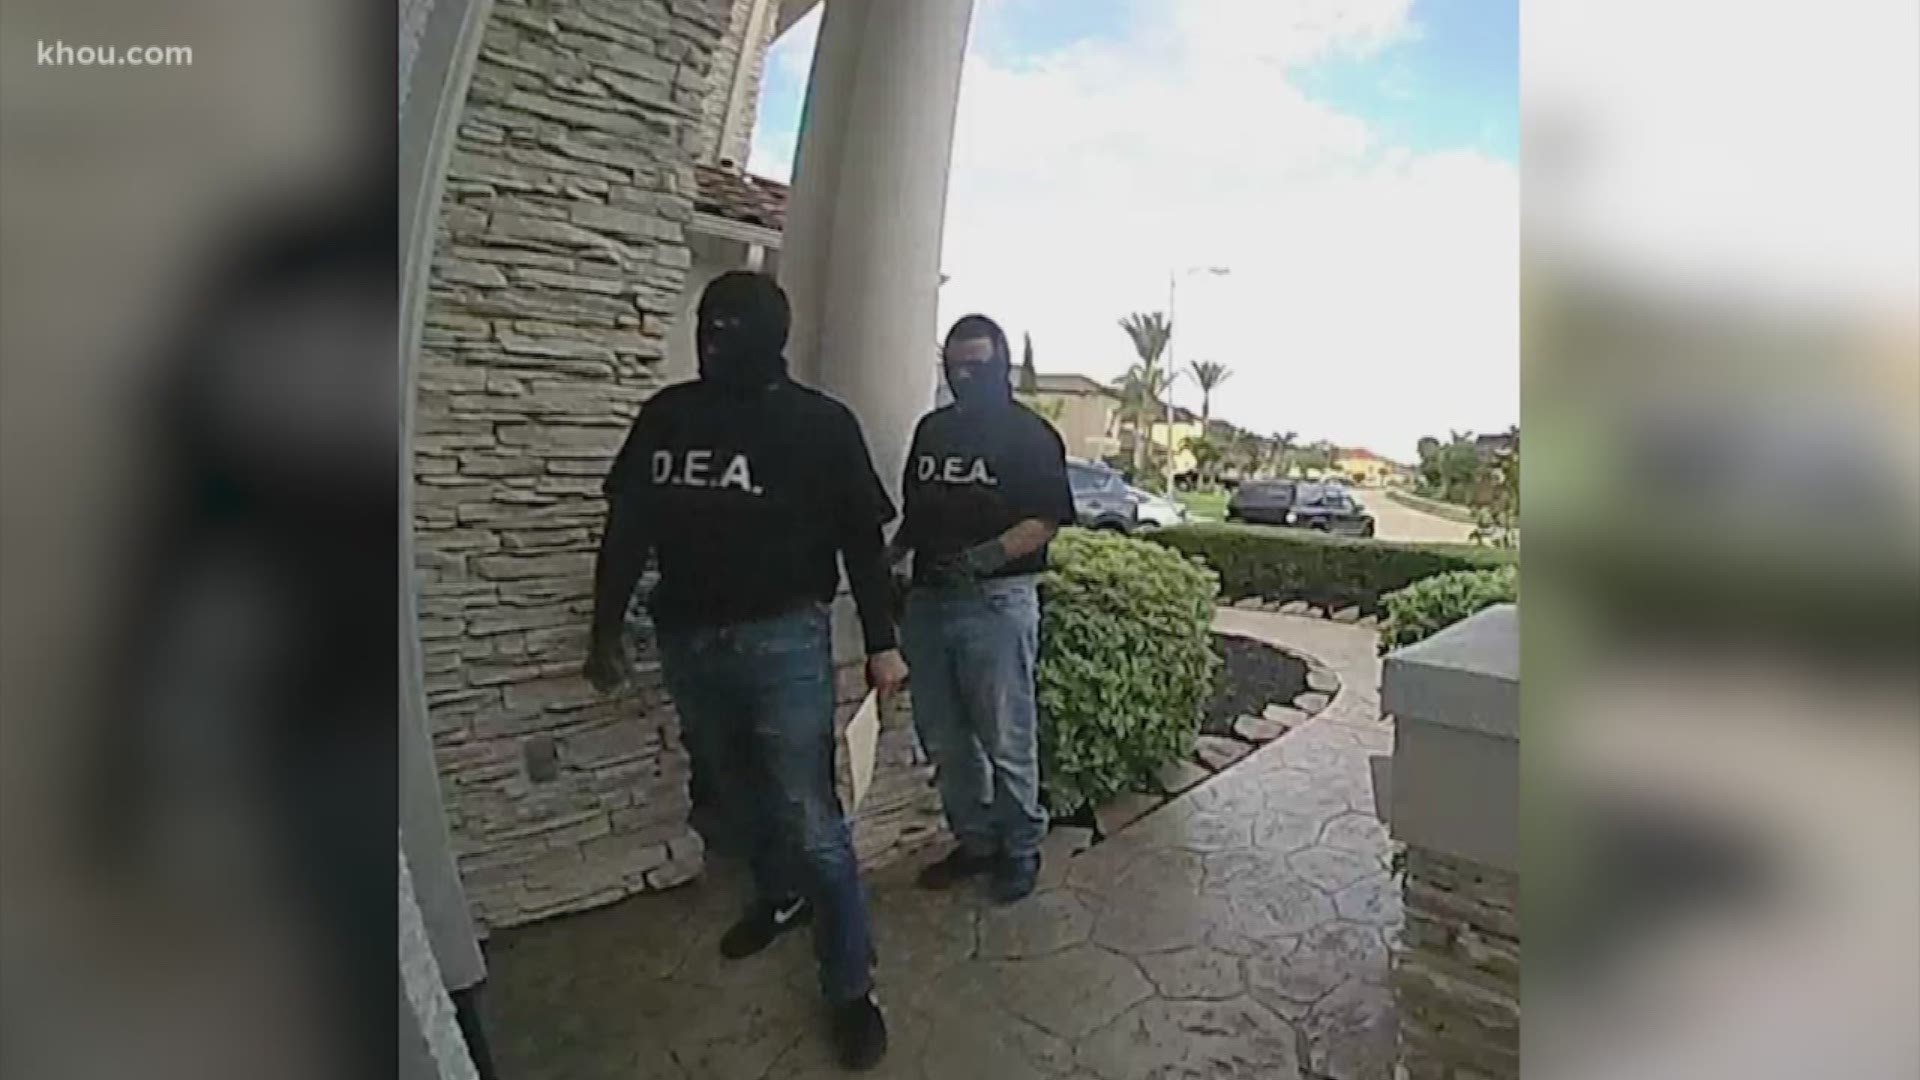 Pearland police are looking for men posing as DEA agents.